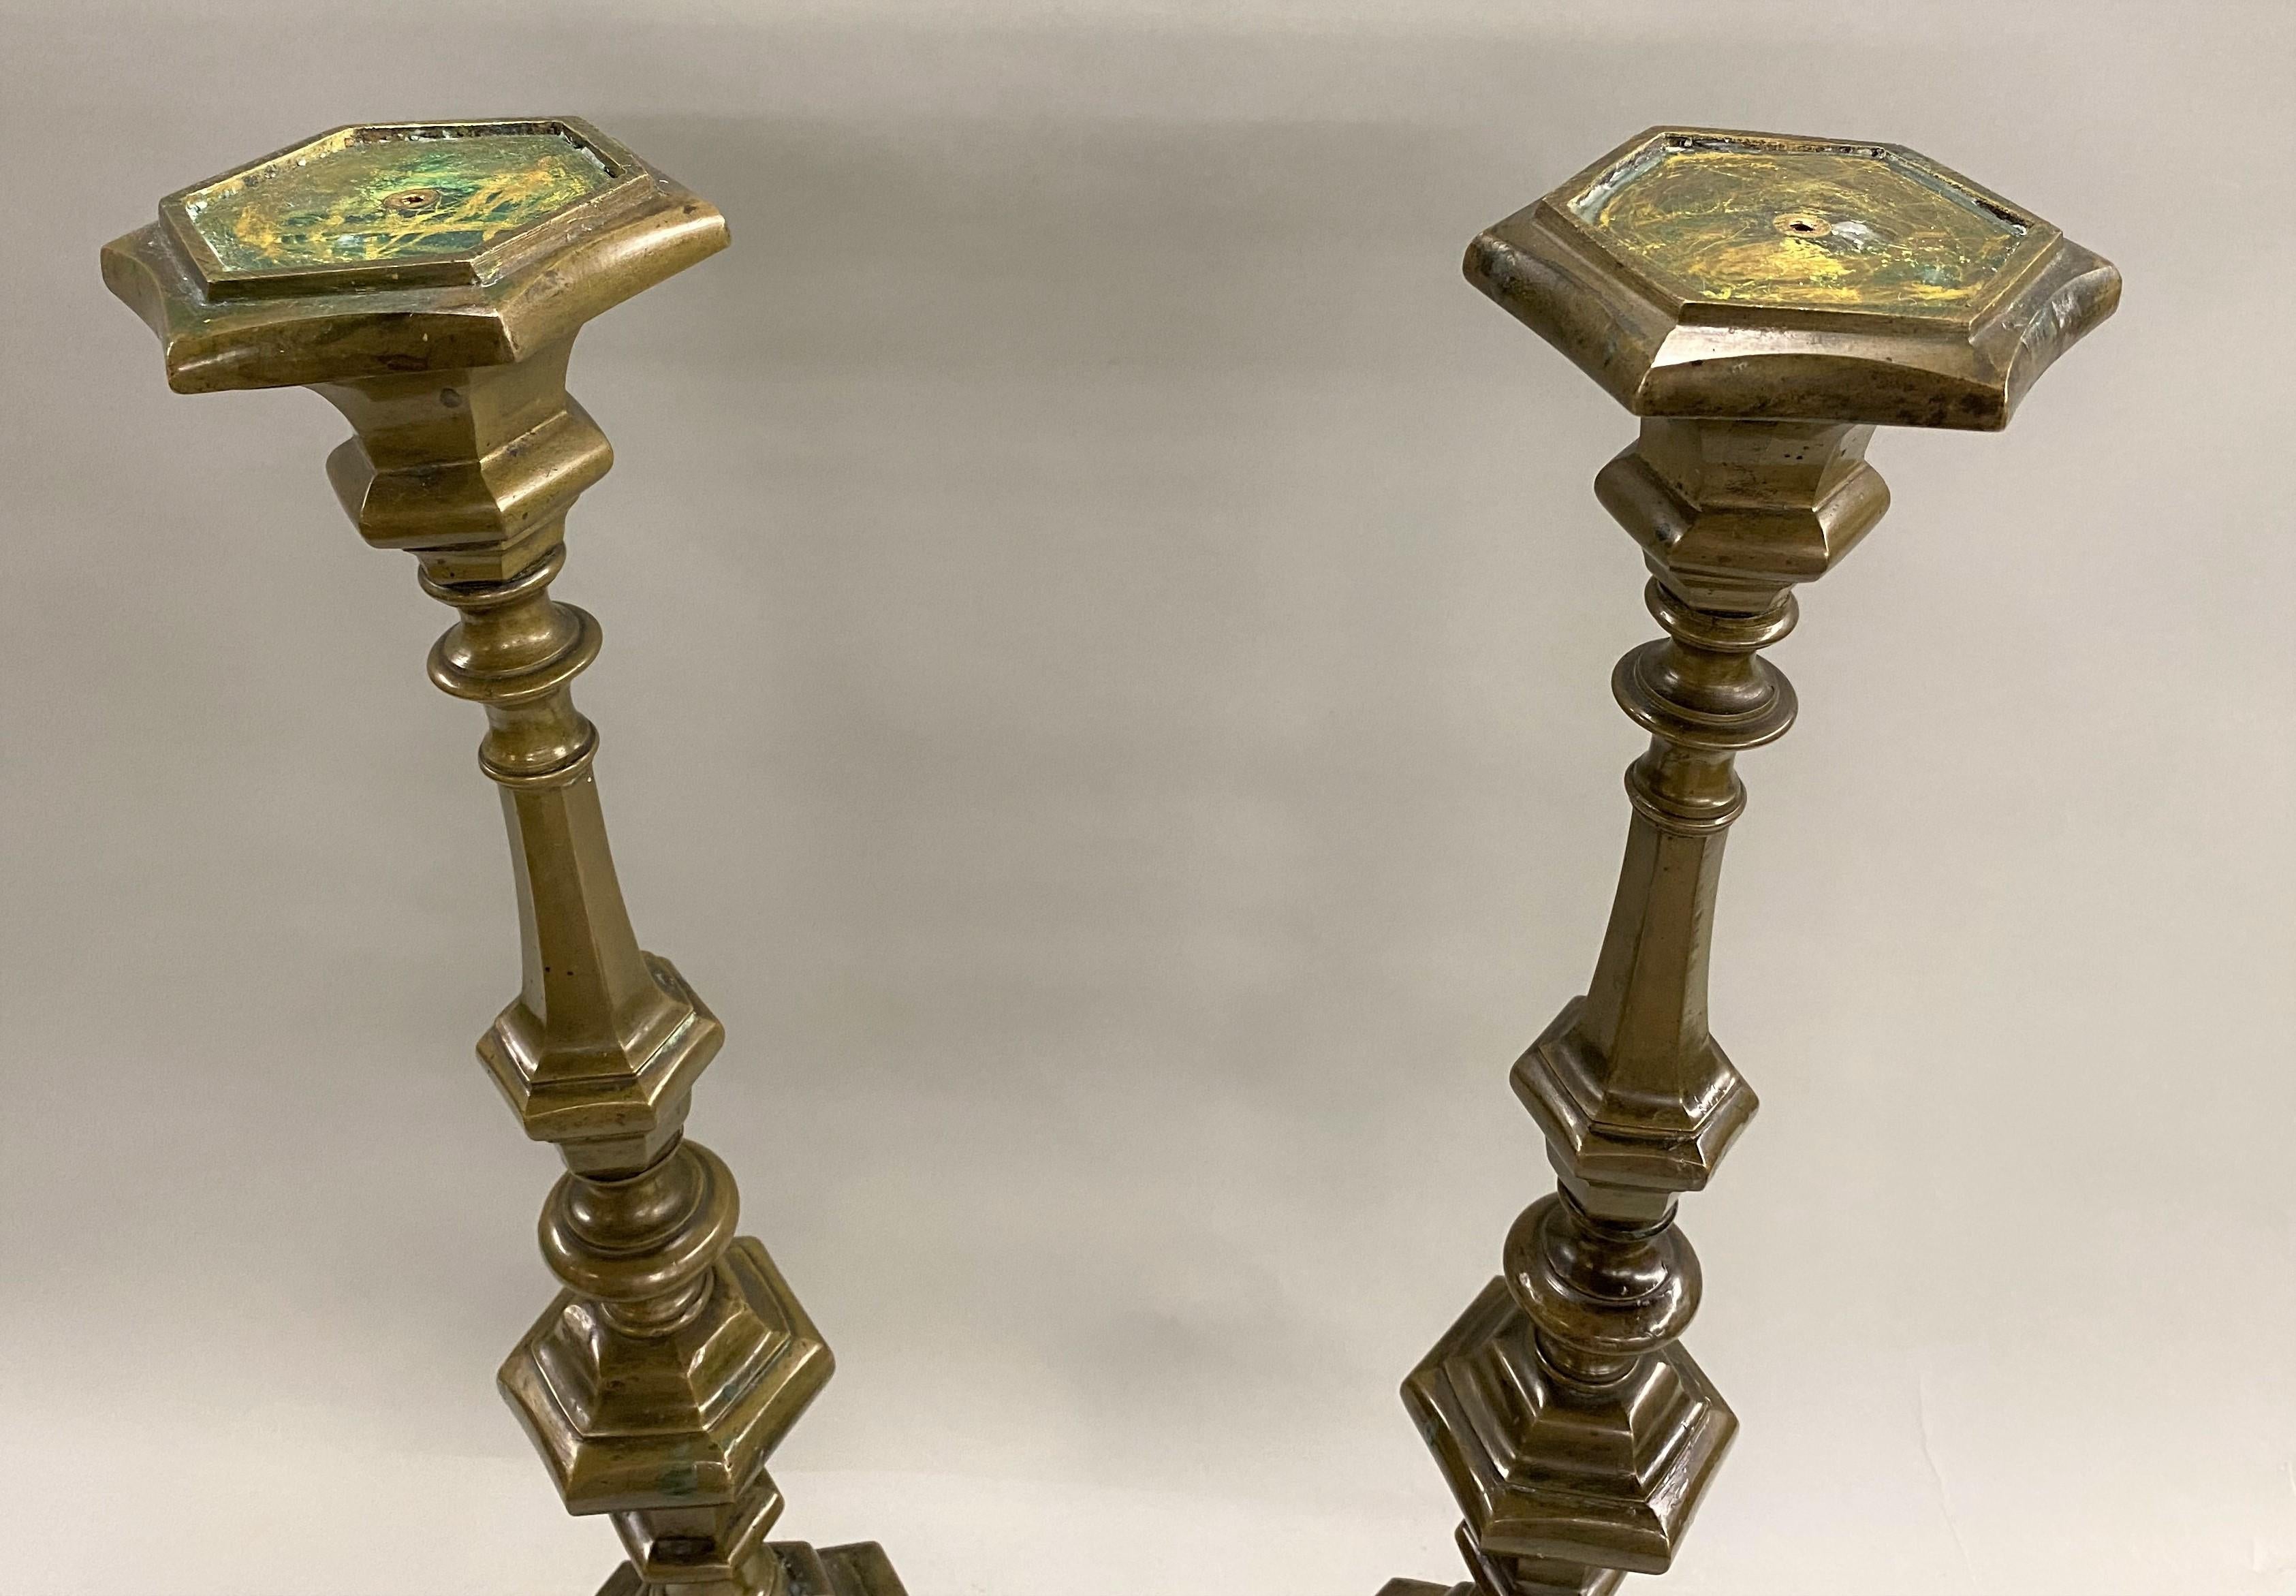 An impressive pair of Baroque style patinated bronze candlesticks with baluster form stem and tripod feet, Continental in origin (possibly Italian) dating to the 18th century, converted to lamps in the 20th century. The wiring and lamp fittings have